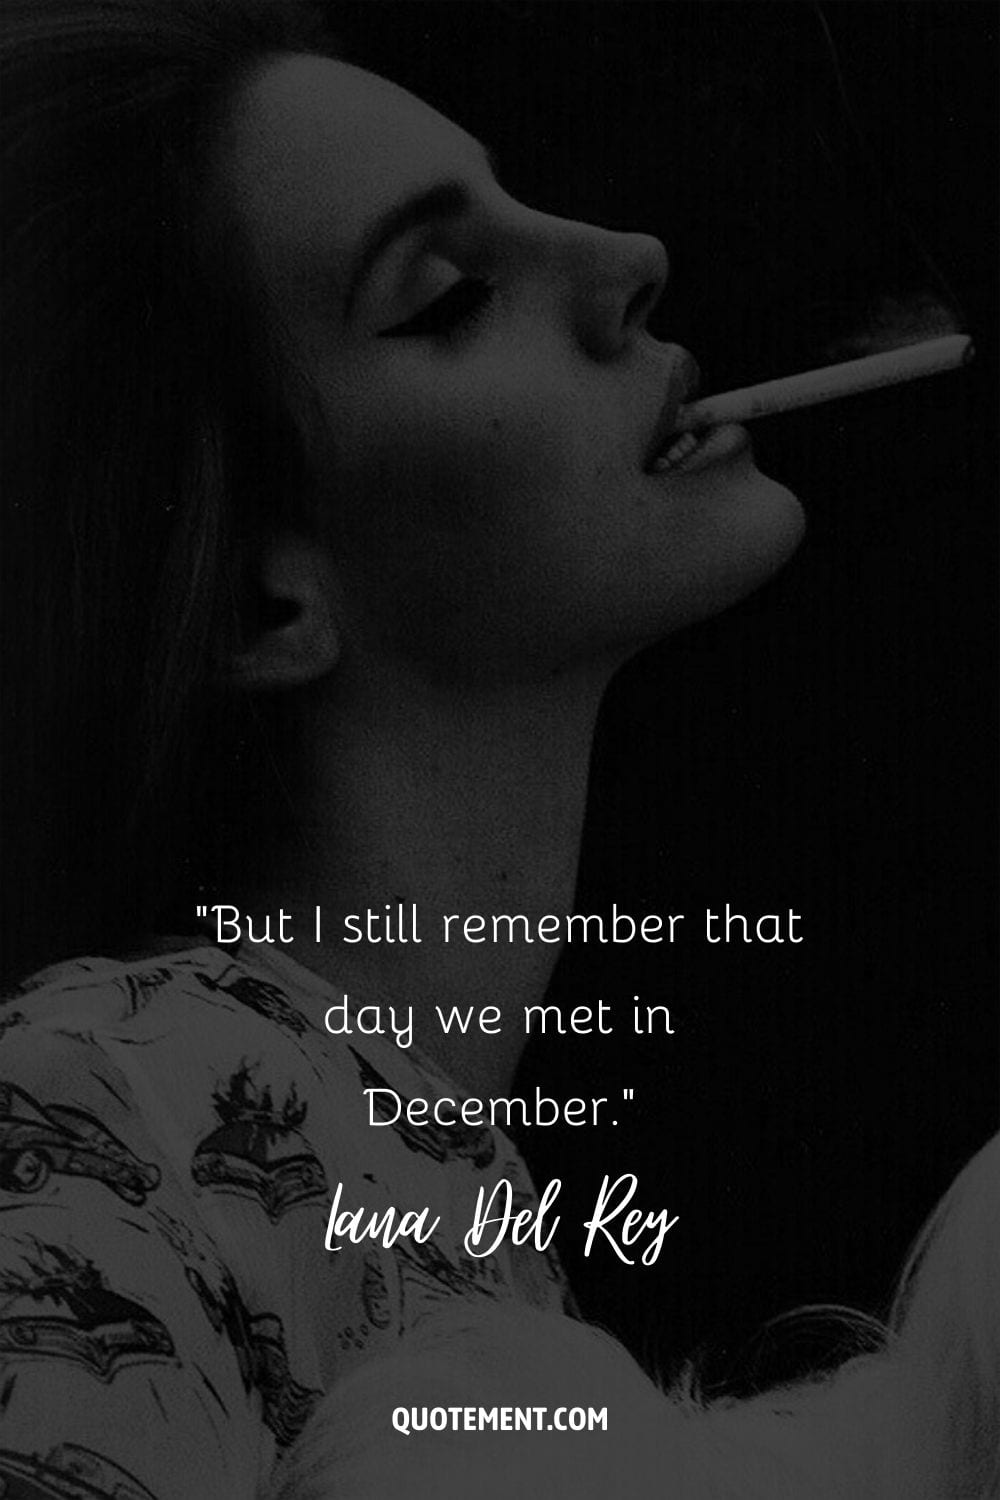 But I still remember that day we met in December.